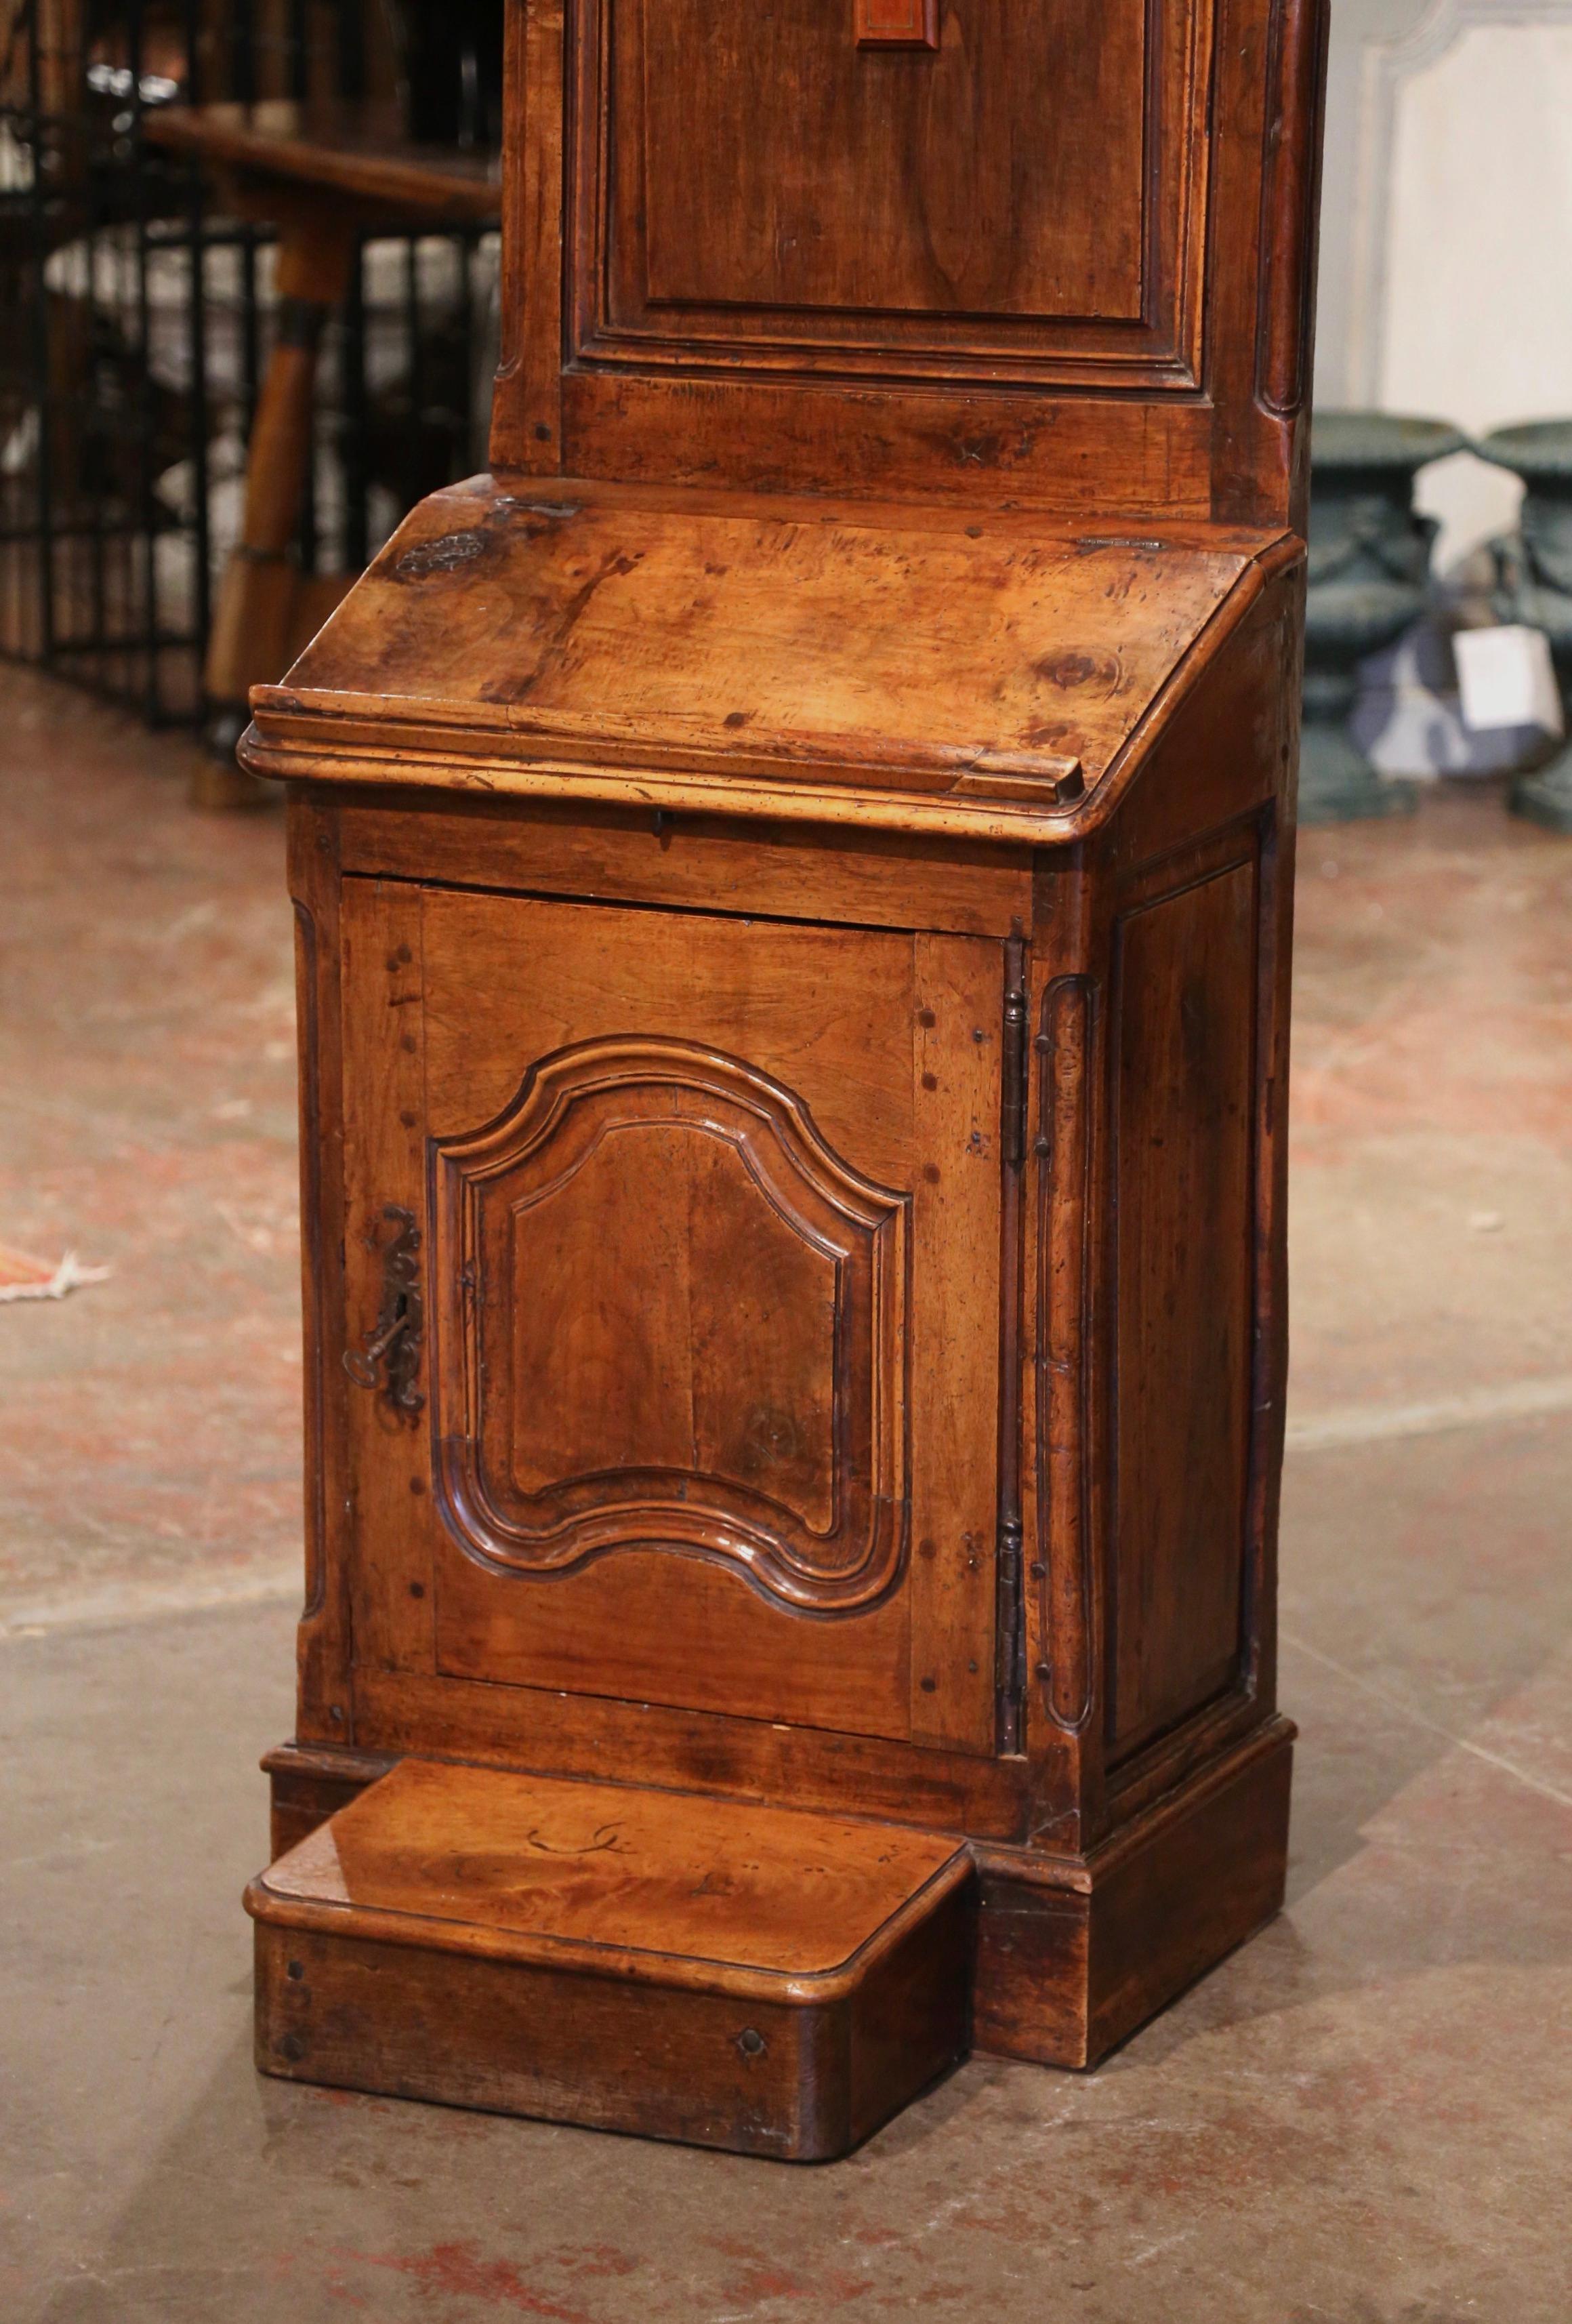 Hand-Carved 18th Century French Carved Walnut Oratoire Prayer Kneeler Cabinet from Burgundy